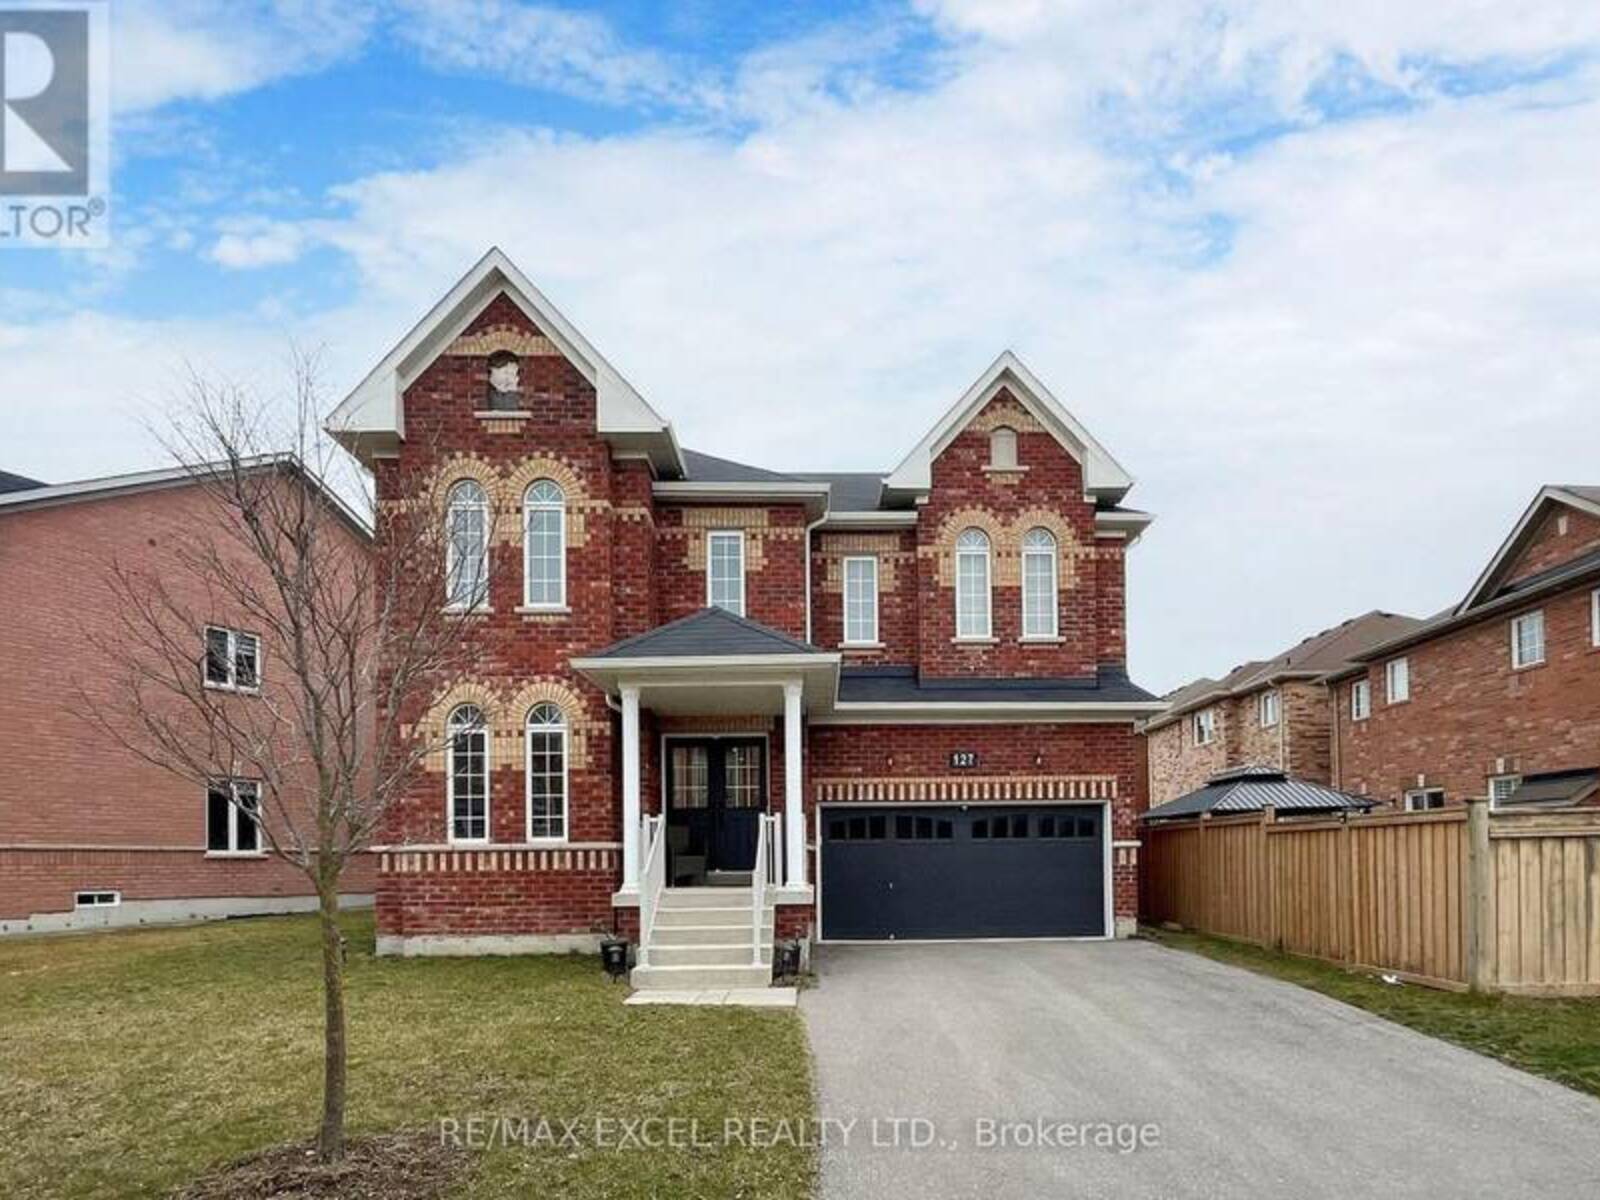 127 GREENWOOD RD, Whitchurch-Stouffville, Ontario L4A 4N7